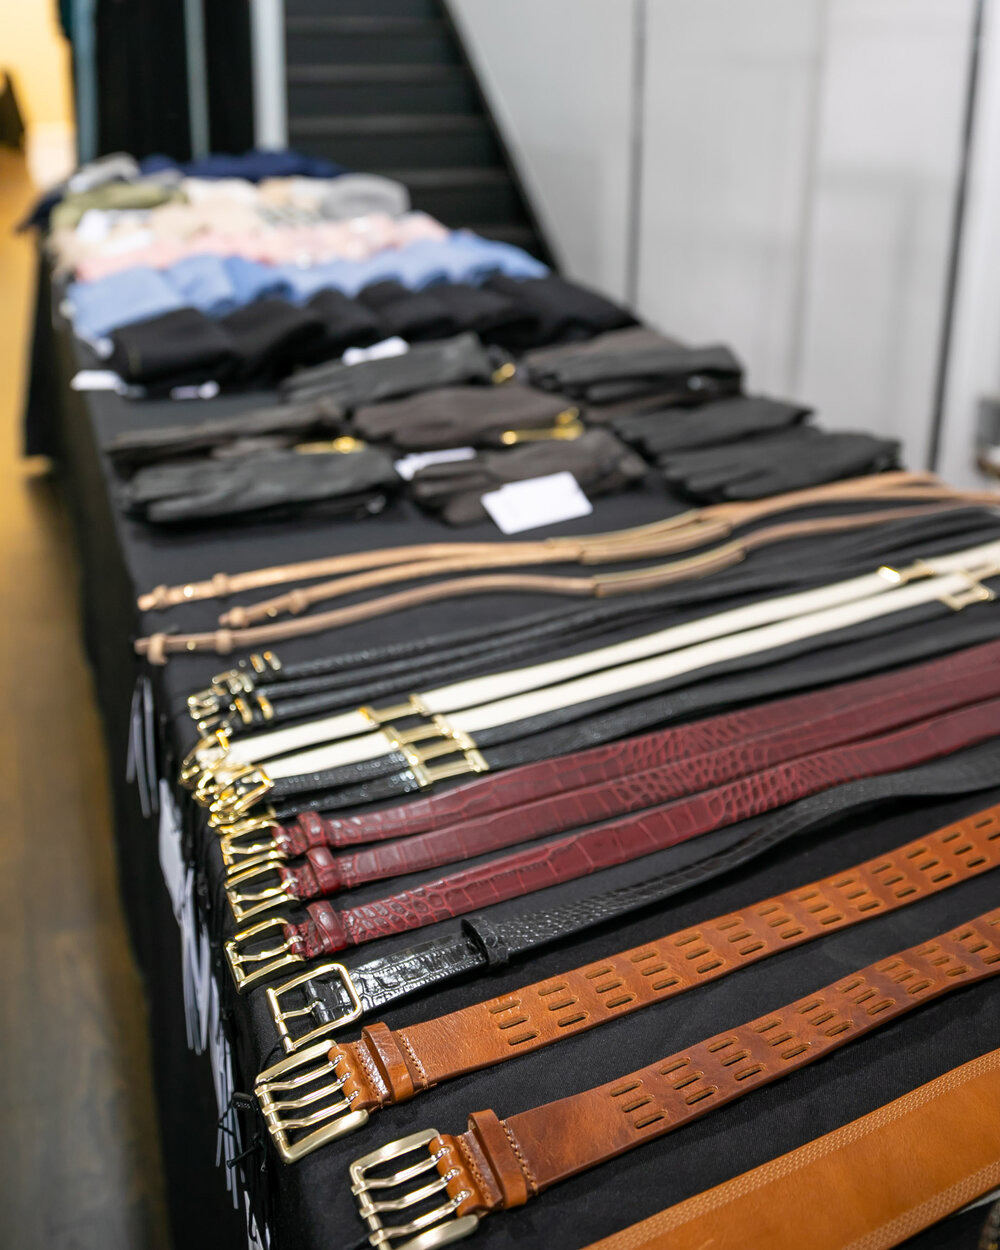 Reiss London Sample Sale in Images